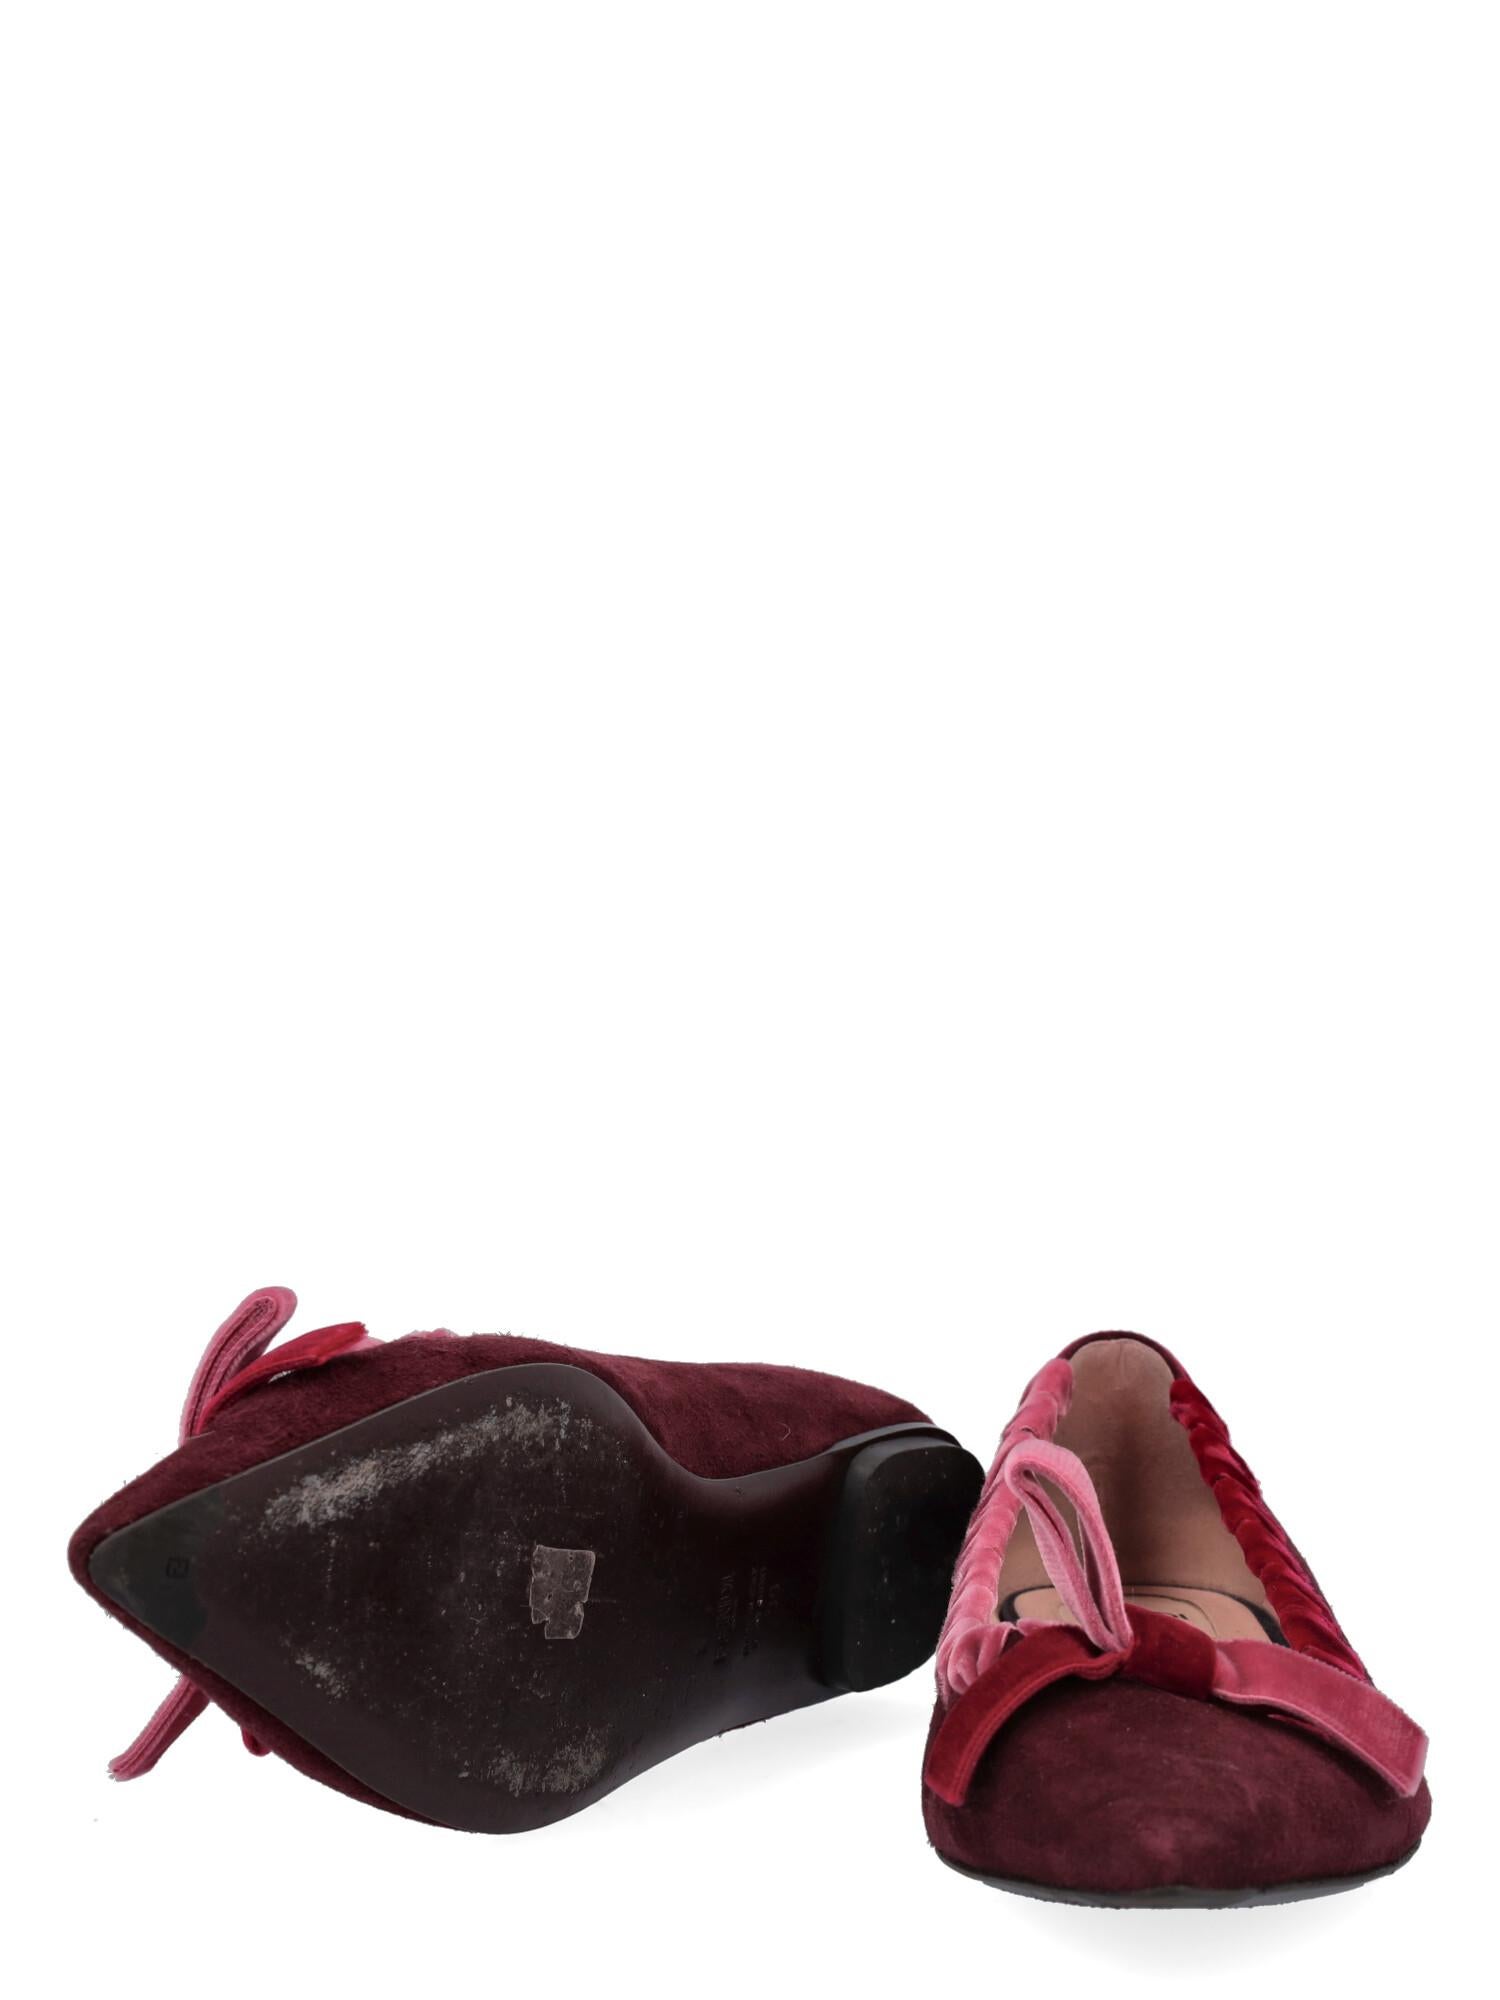 Fendi Women Ballet flats Burgundy Leather EU 39 In Good Condition For Sale In Milan, IT